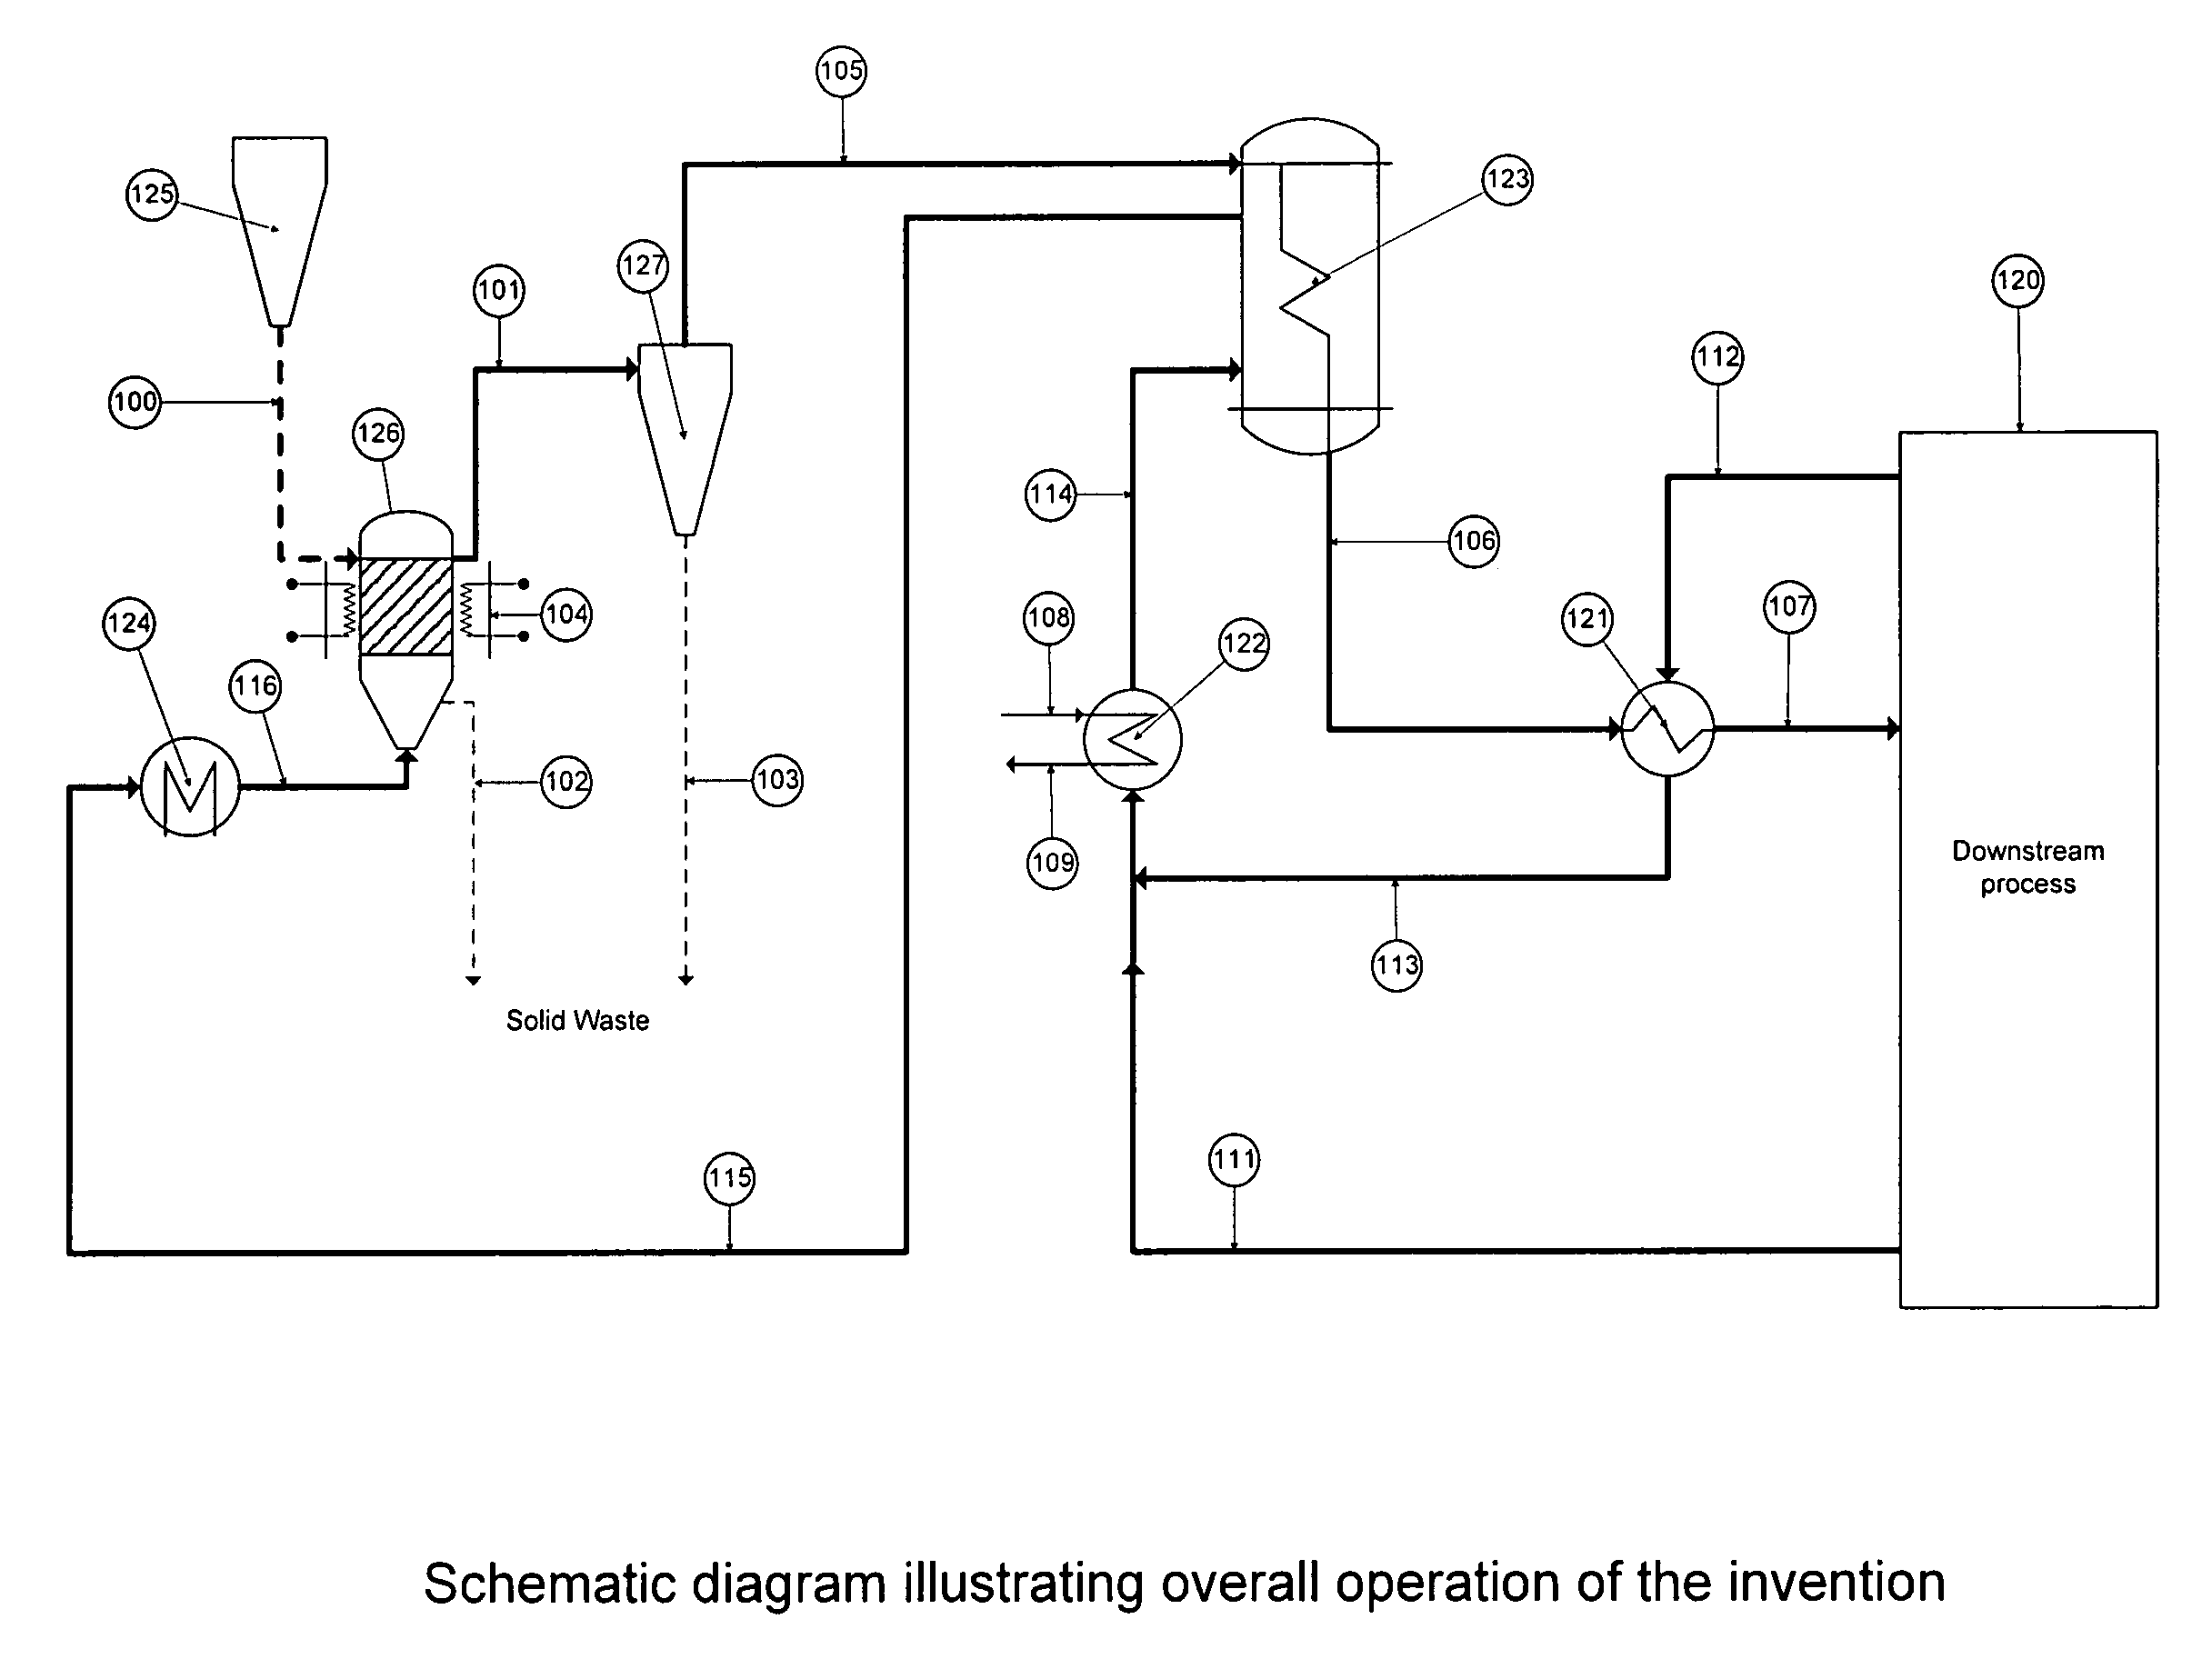 Apparatus and process for hydrogenation of a silicon tetrahalide and silicon to the trihalosilane